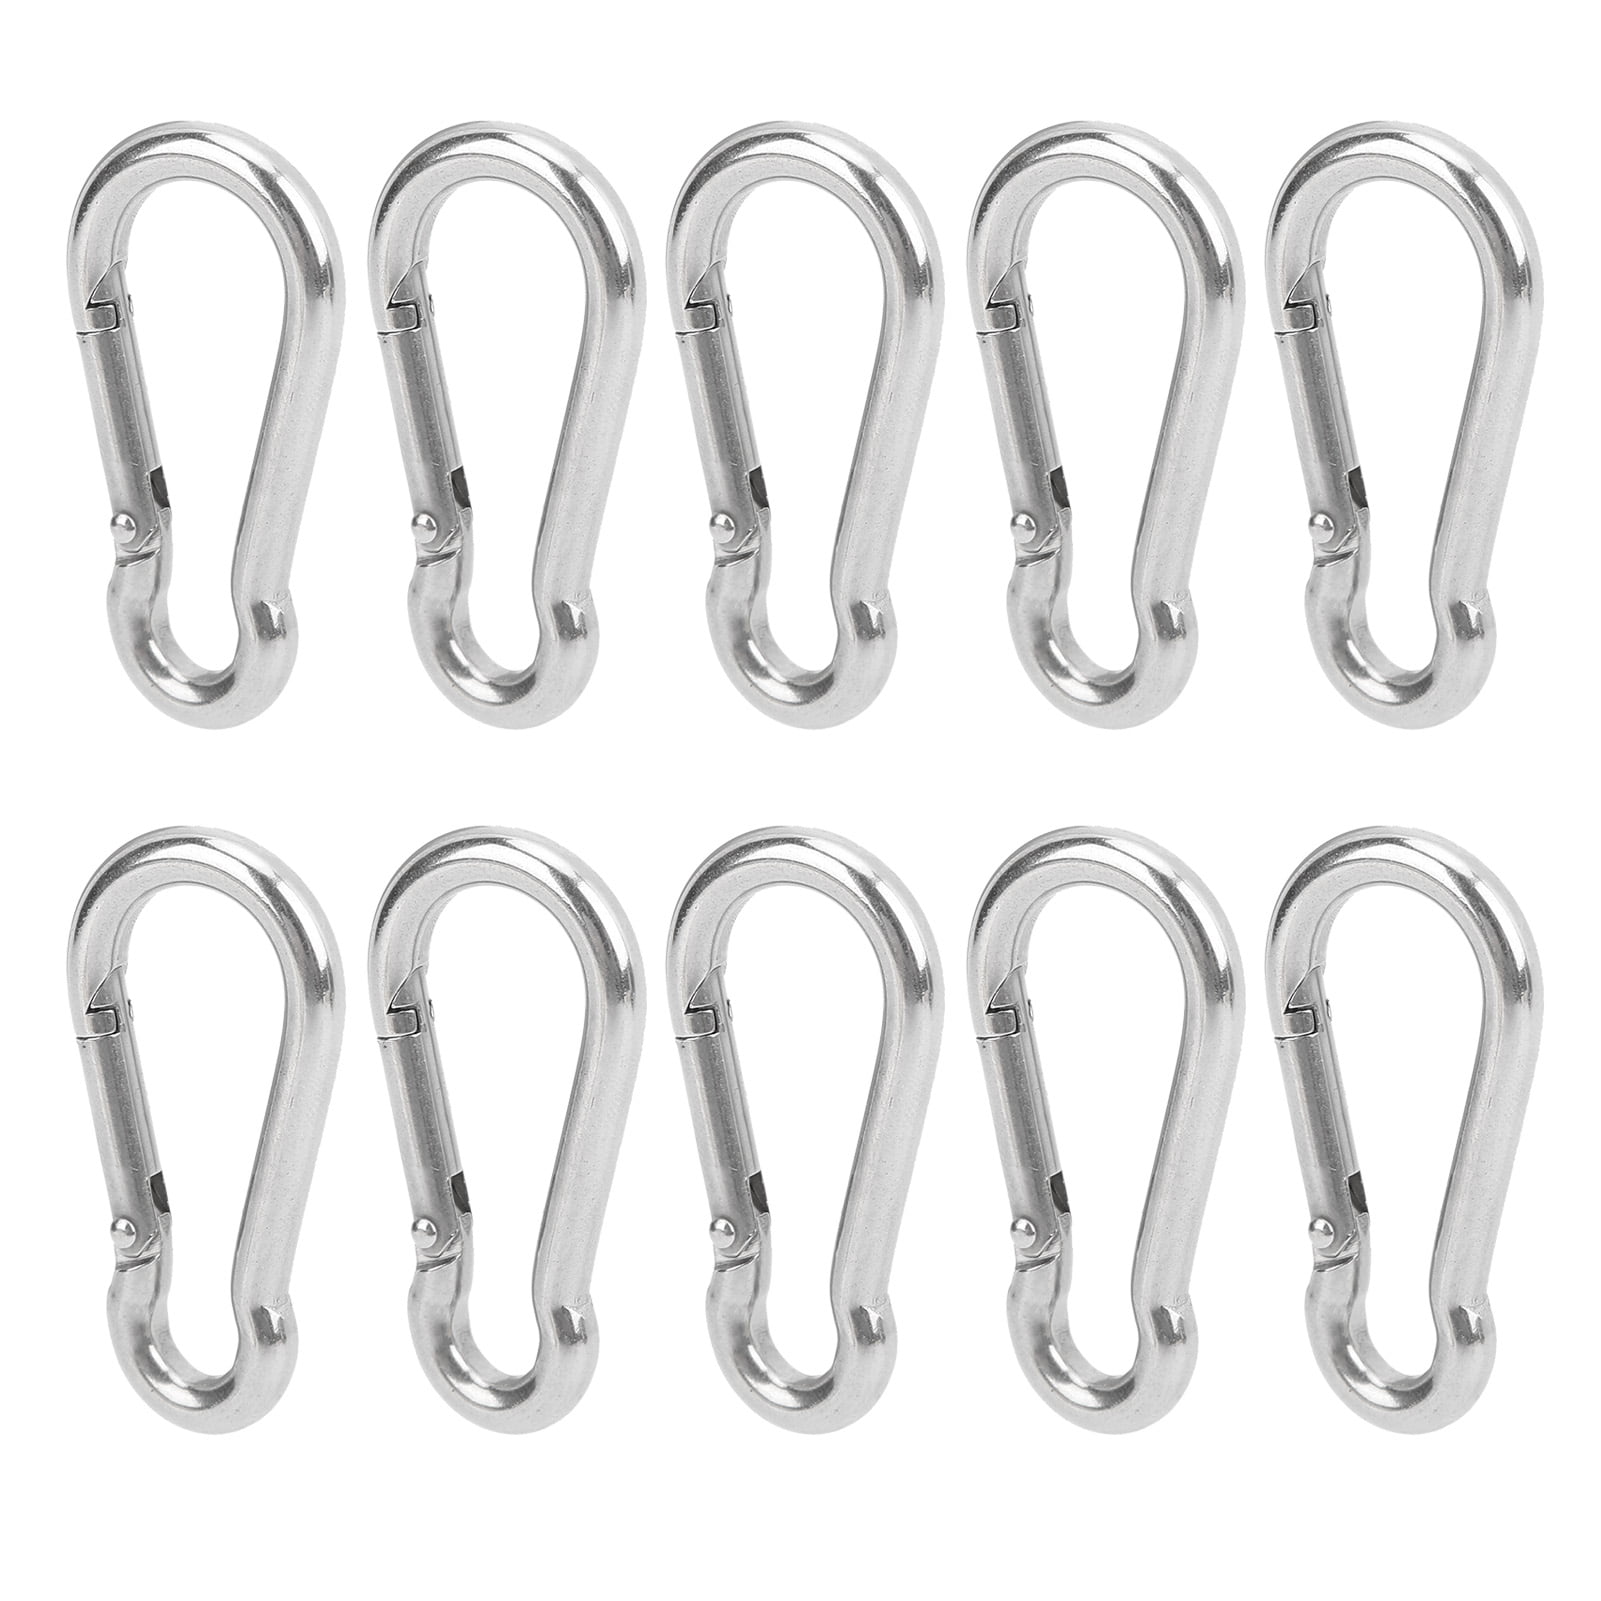 20Pcs Silver Aluminum Spring Carabiner Snap Hook Hanger Keychain Hiking Replace 